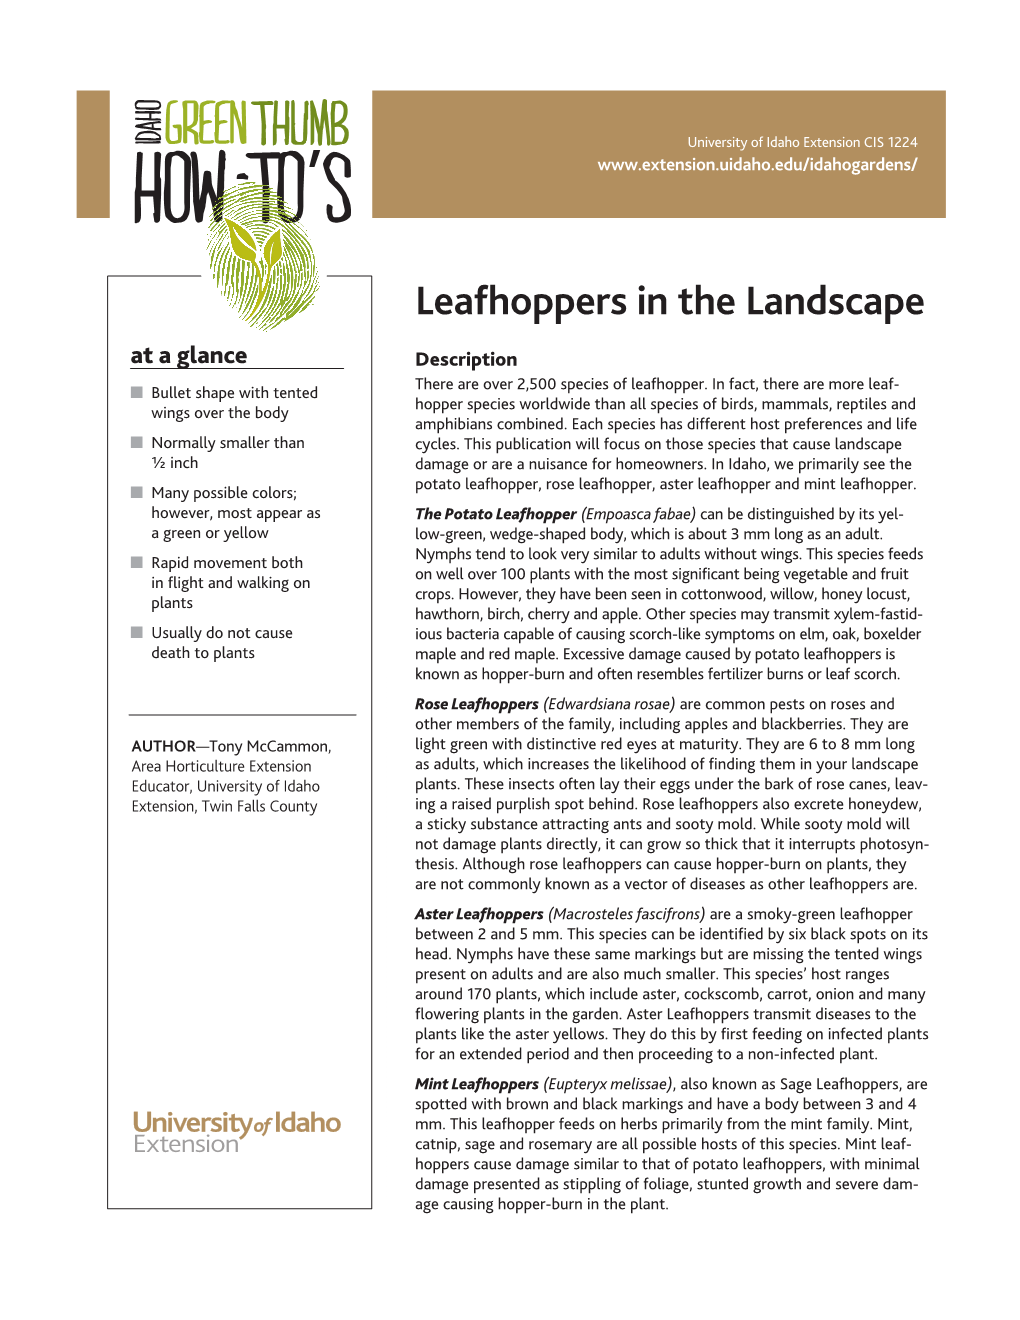 Leafhoppers in the Landscape at a Glance Description There Are Over 2,500 Species of Leafhopper